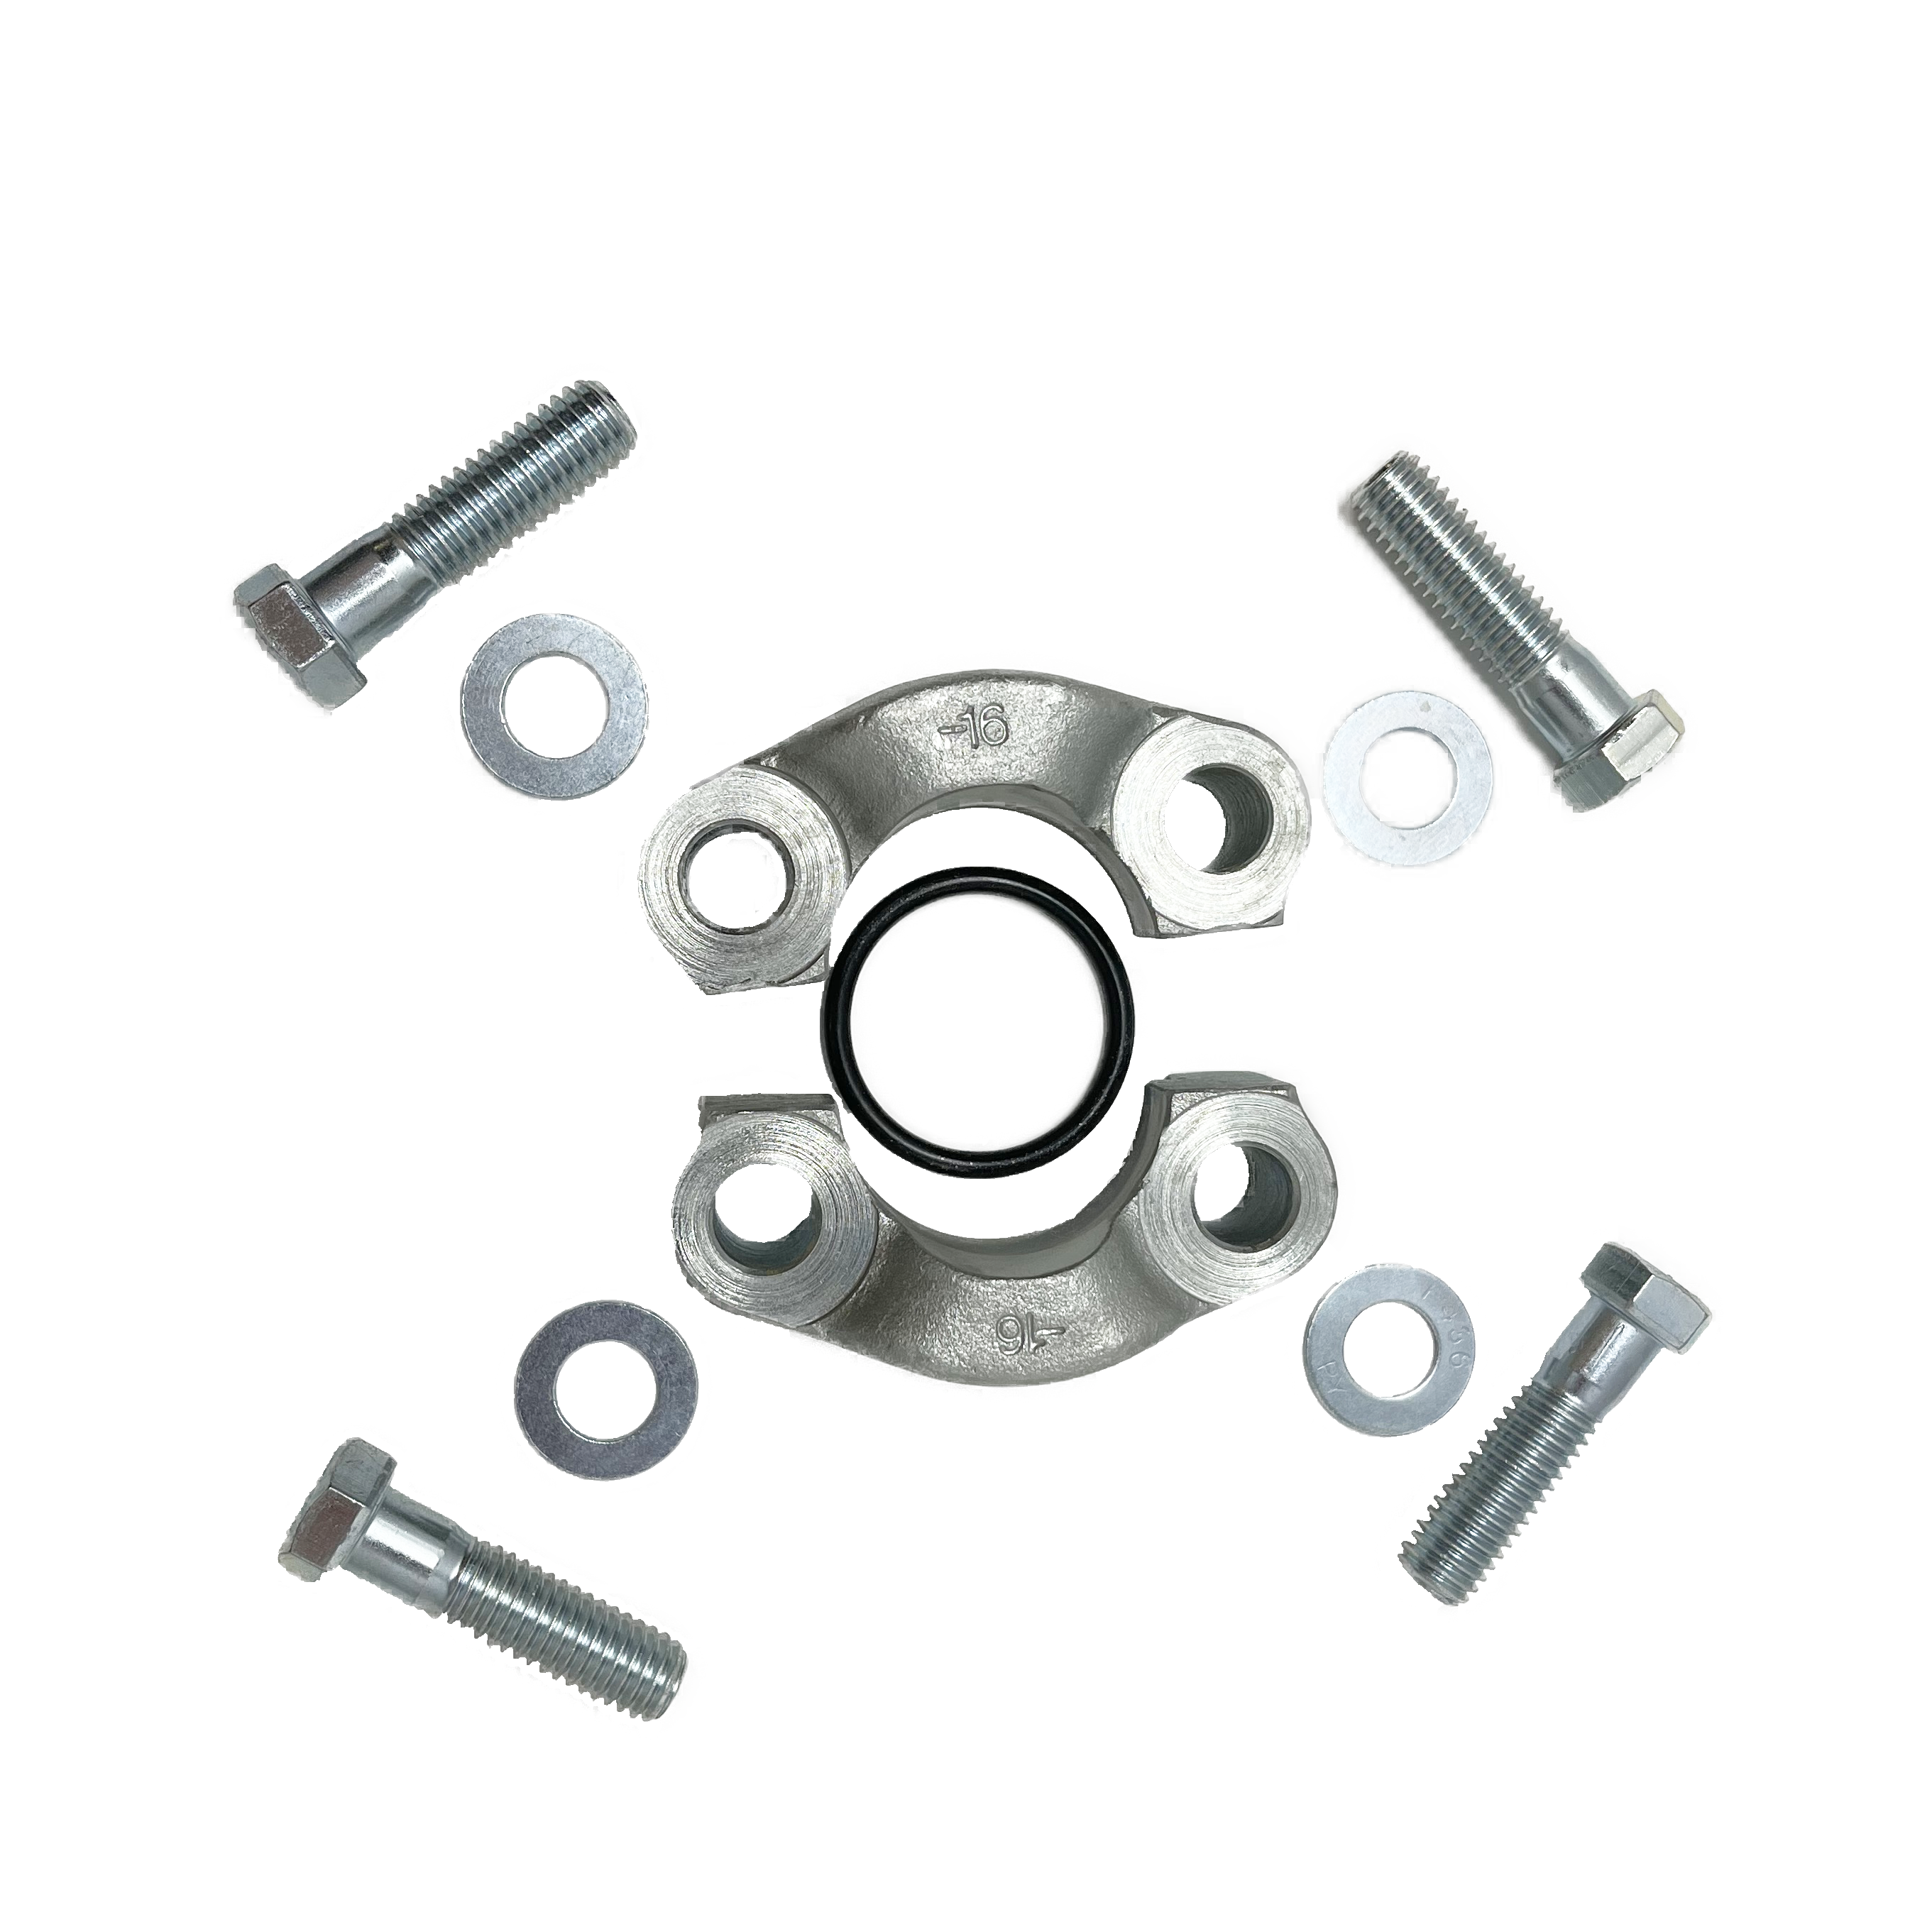 24SFXO : AFP Split Flange Kit, Steel, 1.5" Code 62, 6000psi, Includes two (2) halves, four (4) bolts, four (4) washers, and one (1) O-Ring